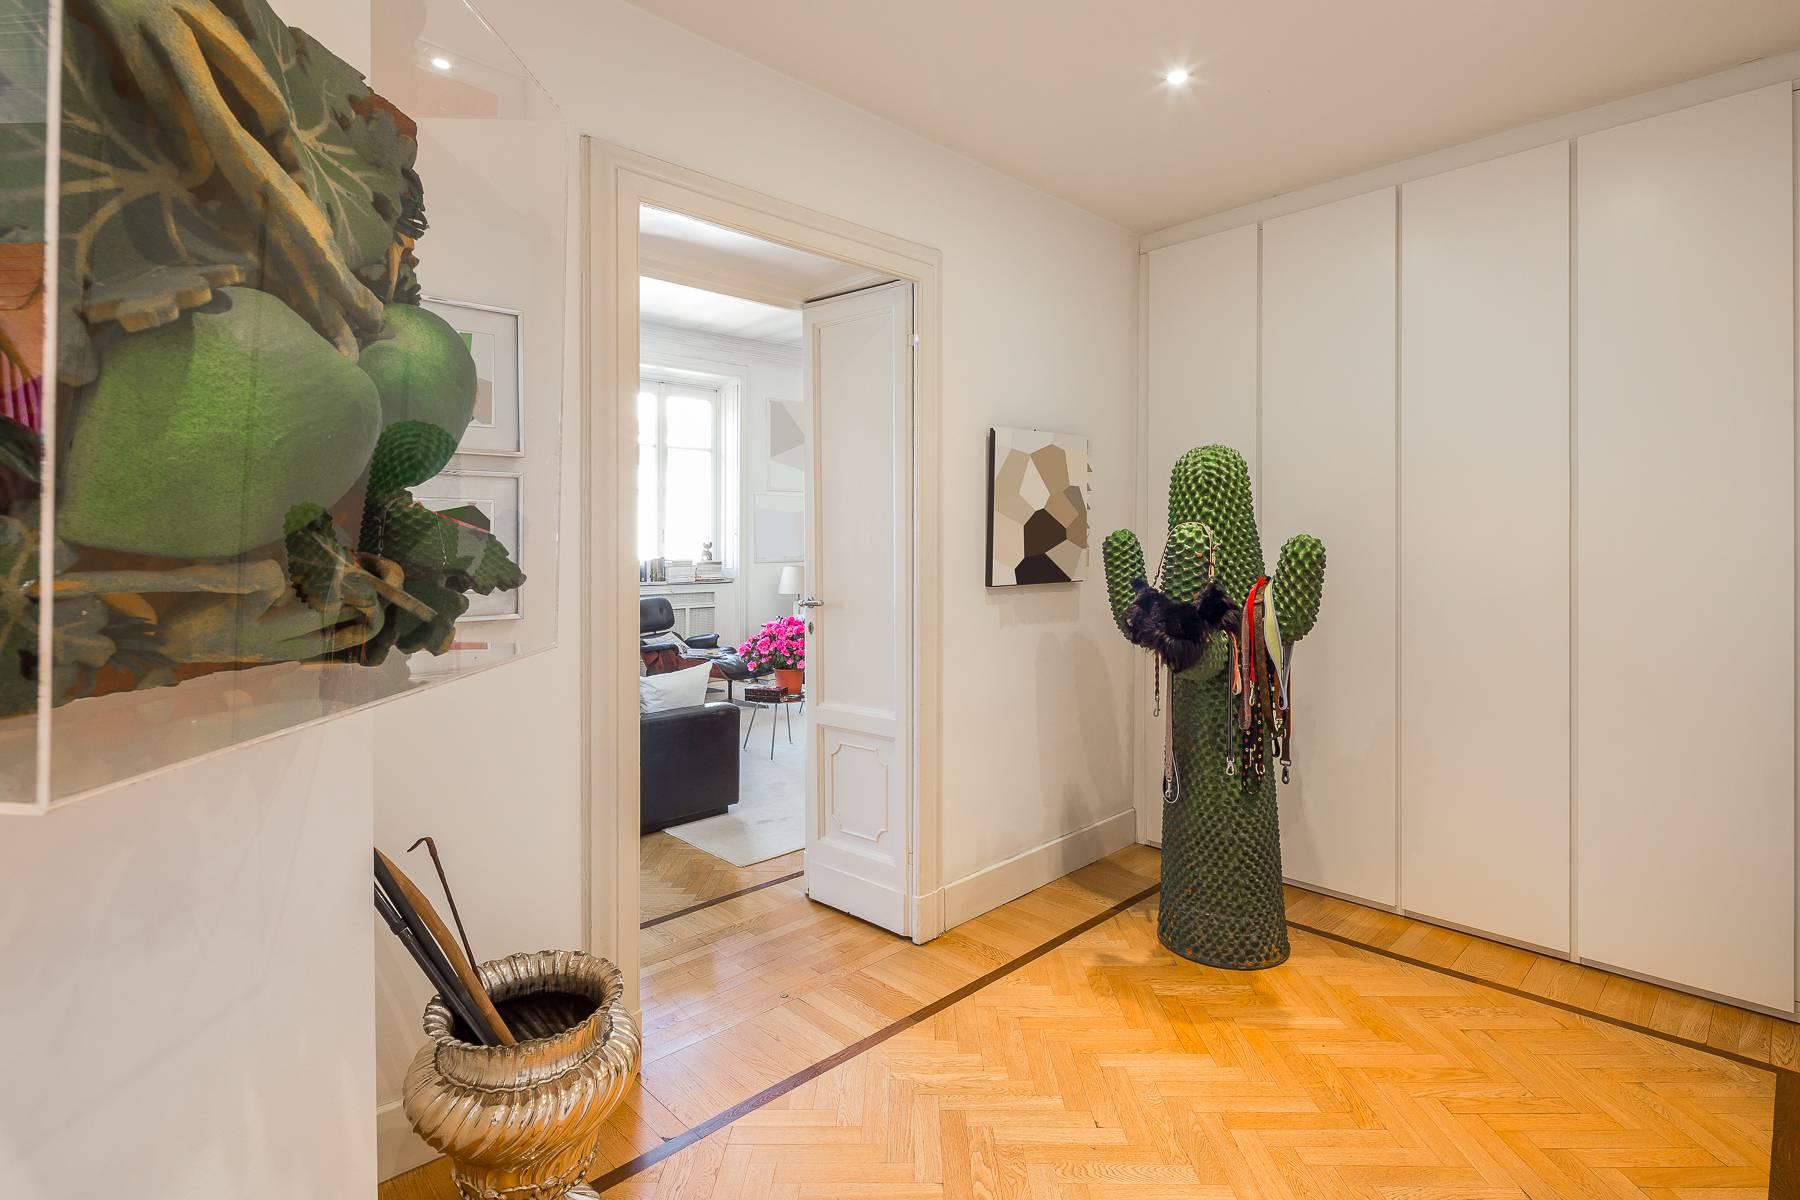 Exclusive 200-sqm apartment in bare ownership in a period building - 5